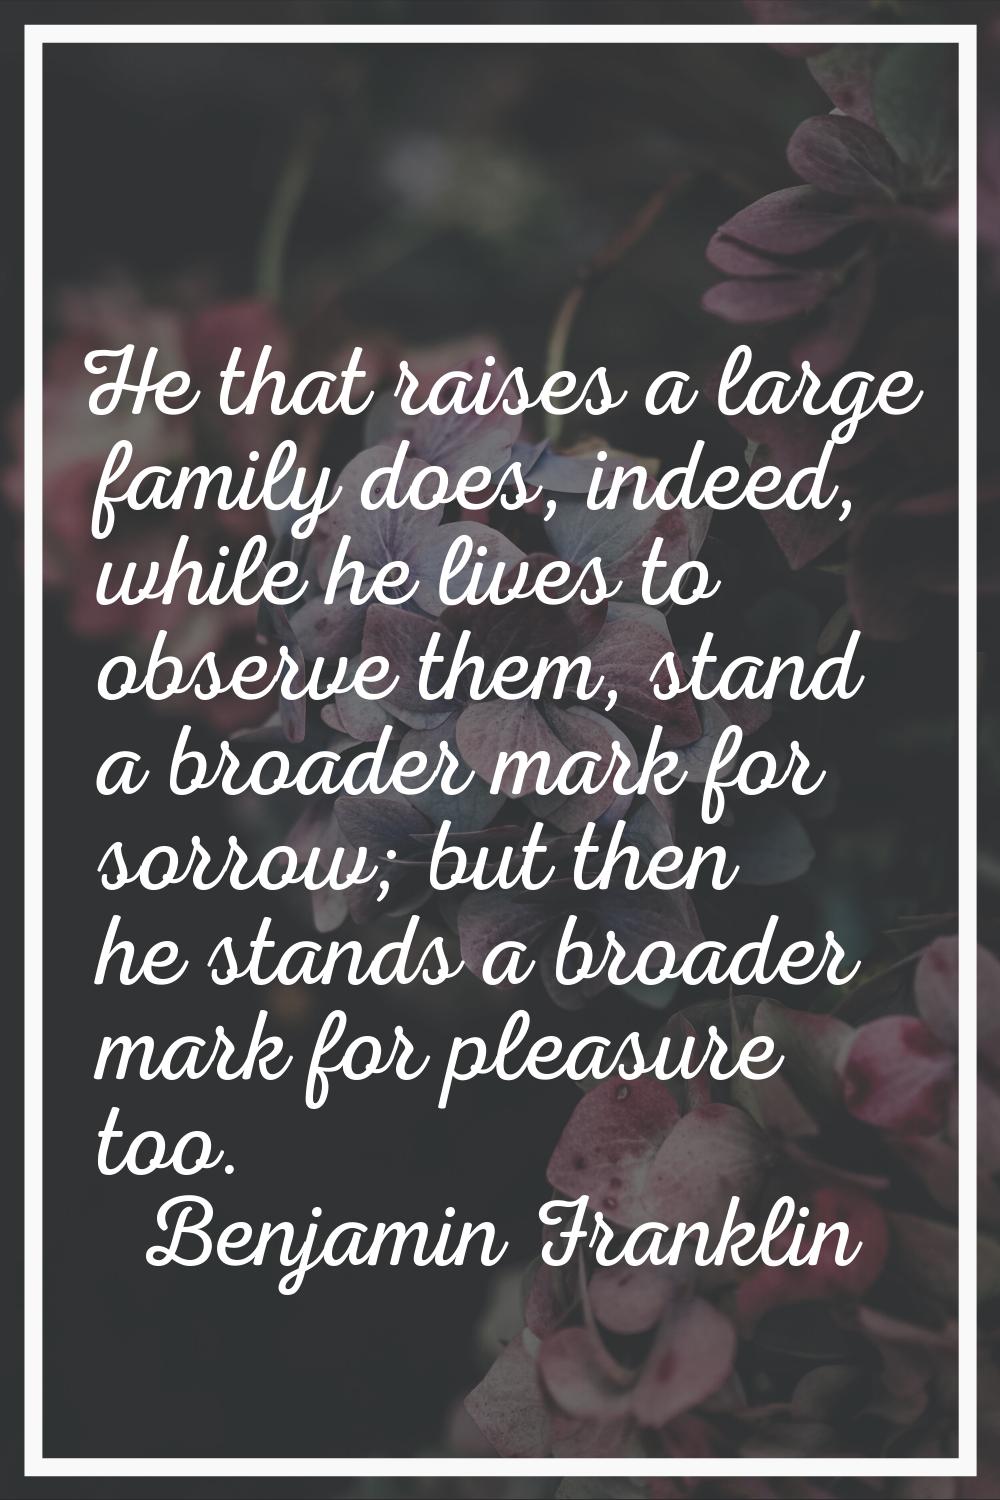 He that raises a large family does, indeed, while he lives to observe them, stand a broader mark fo